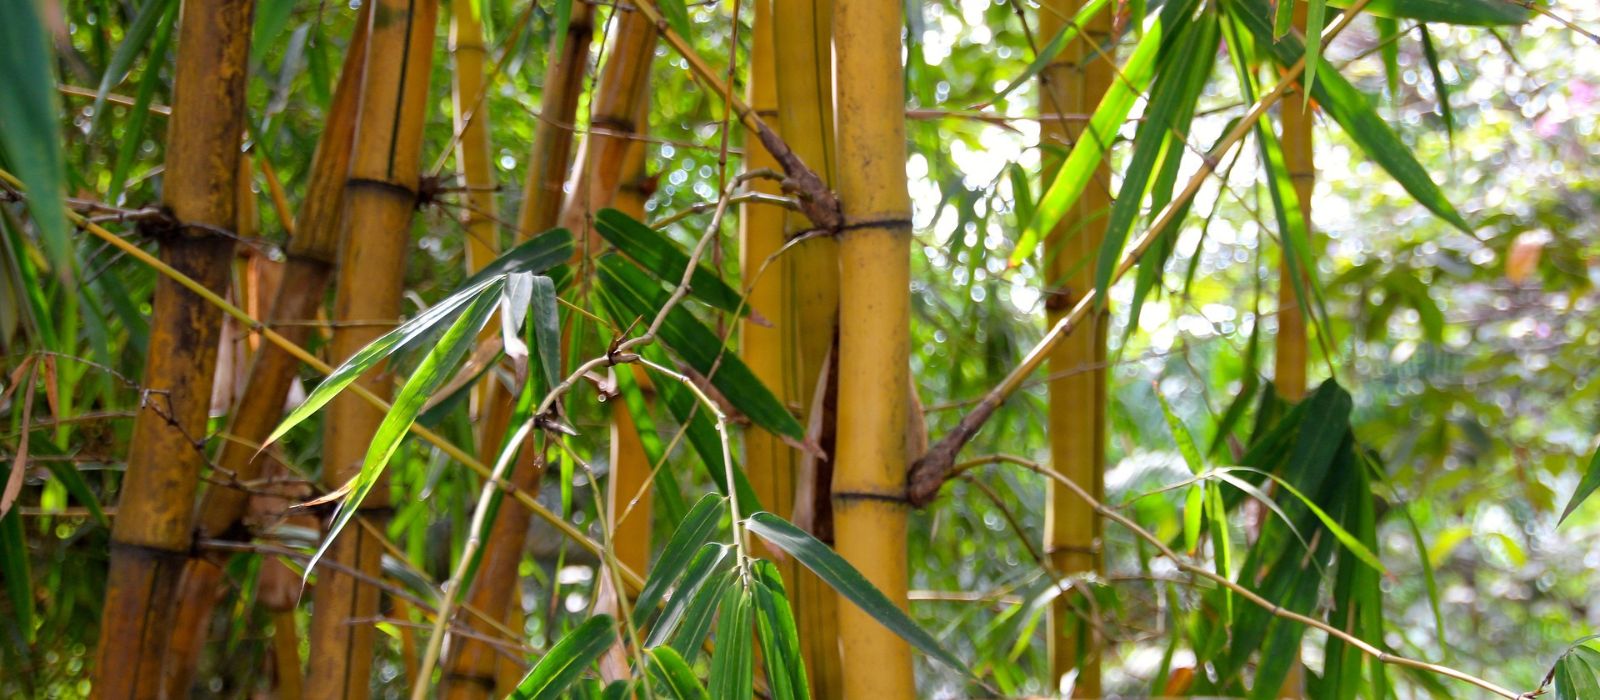 Bamboo is used in India for making Lathi, Ladder, Flute, Incense Sticks, War equipment, and for various ‘religious and social’ purposes for many a centuries. Today, Bamboo is being hailed as ‘Green Gold’ and its farming is considered more beneficial than sugarcane and rice.